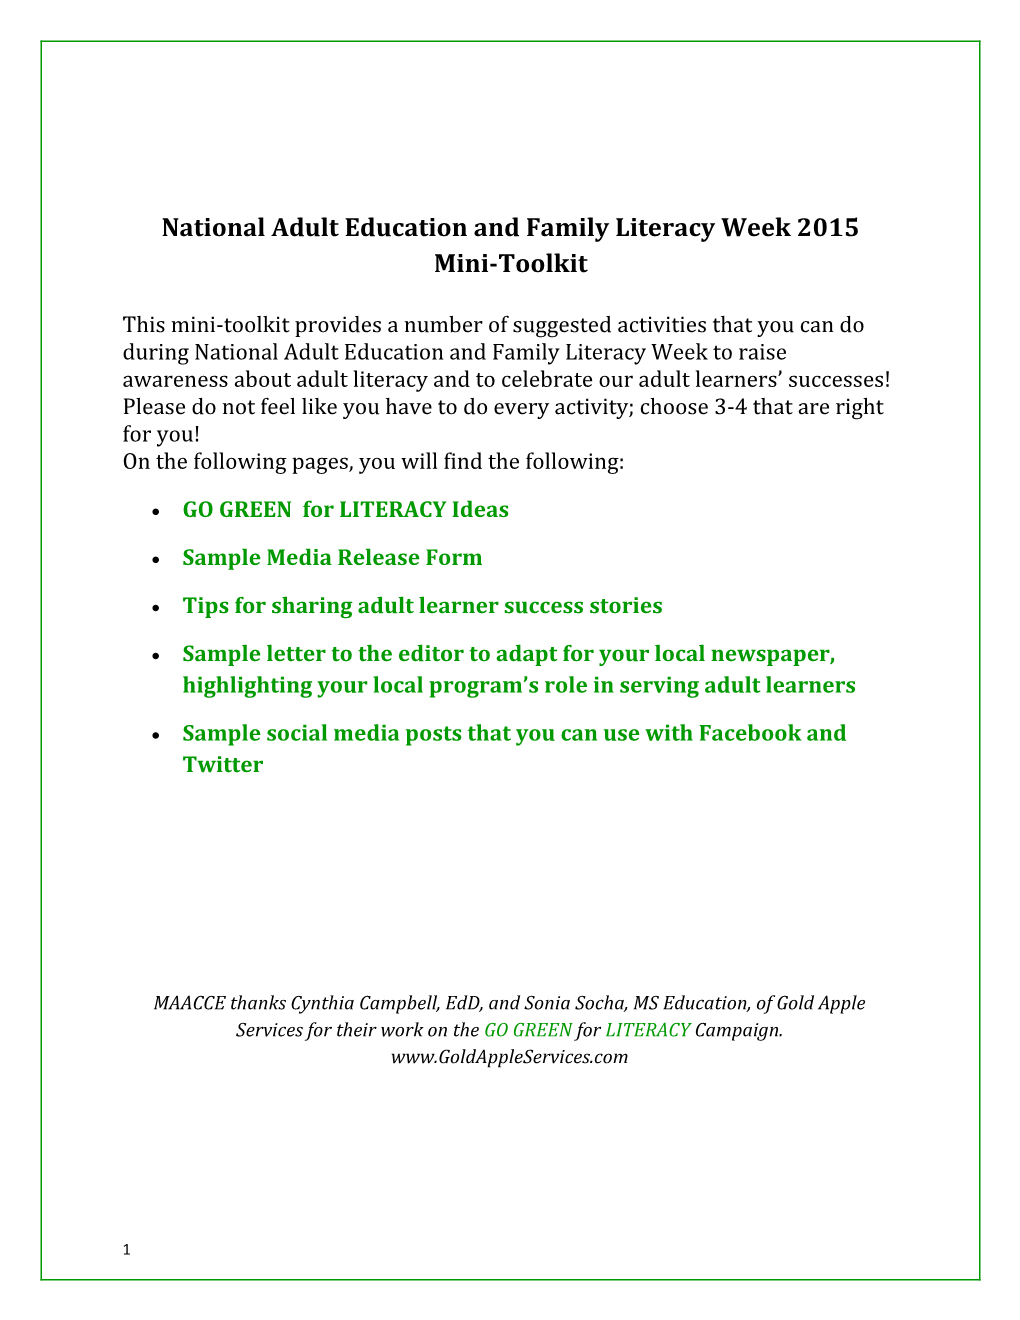 National Adult Education and Family Literacy Week 2015